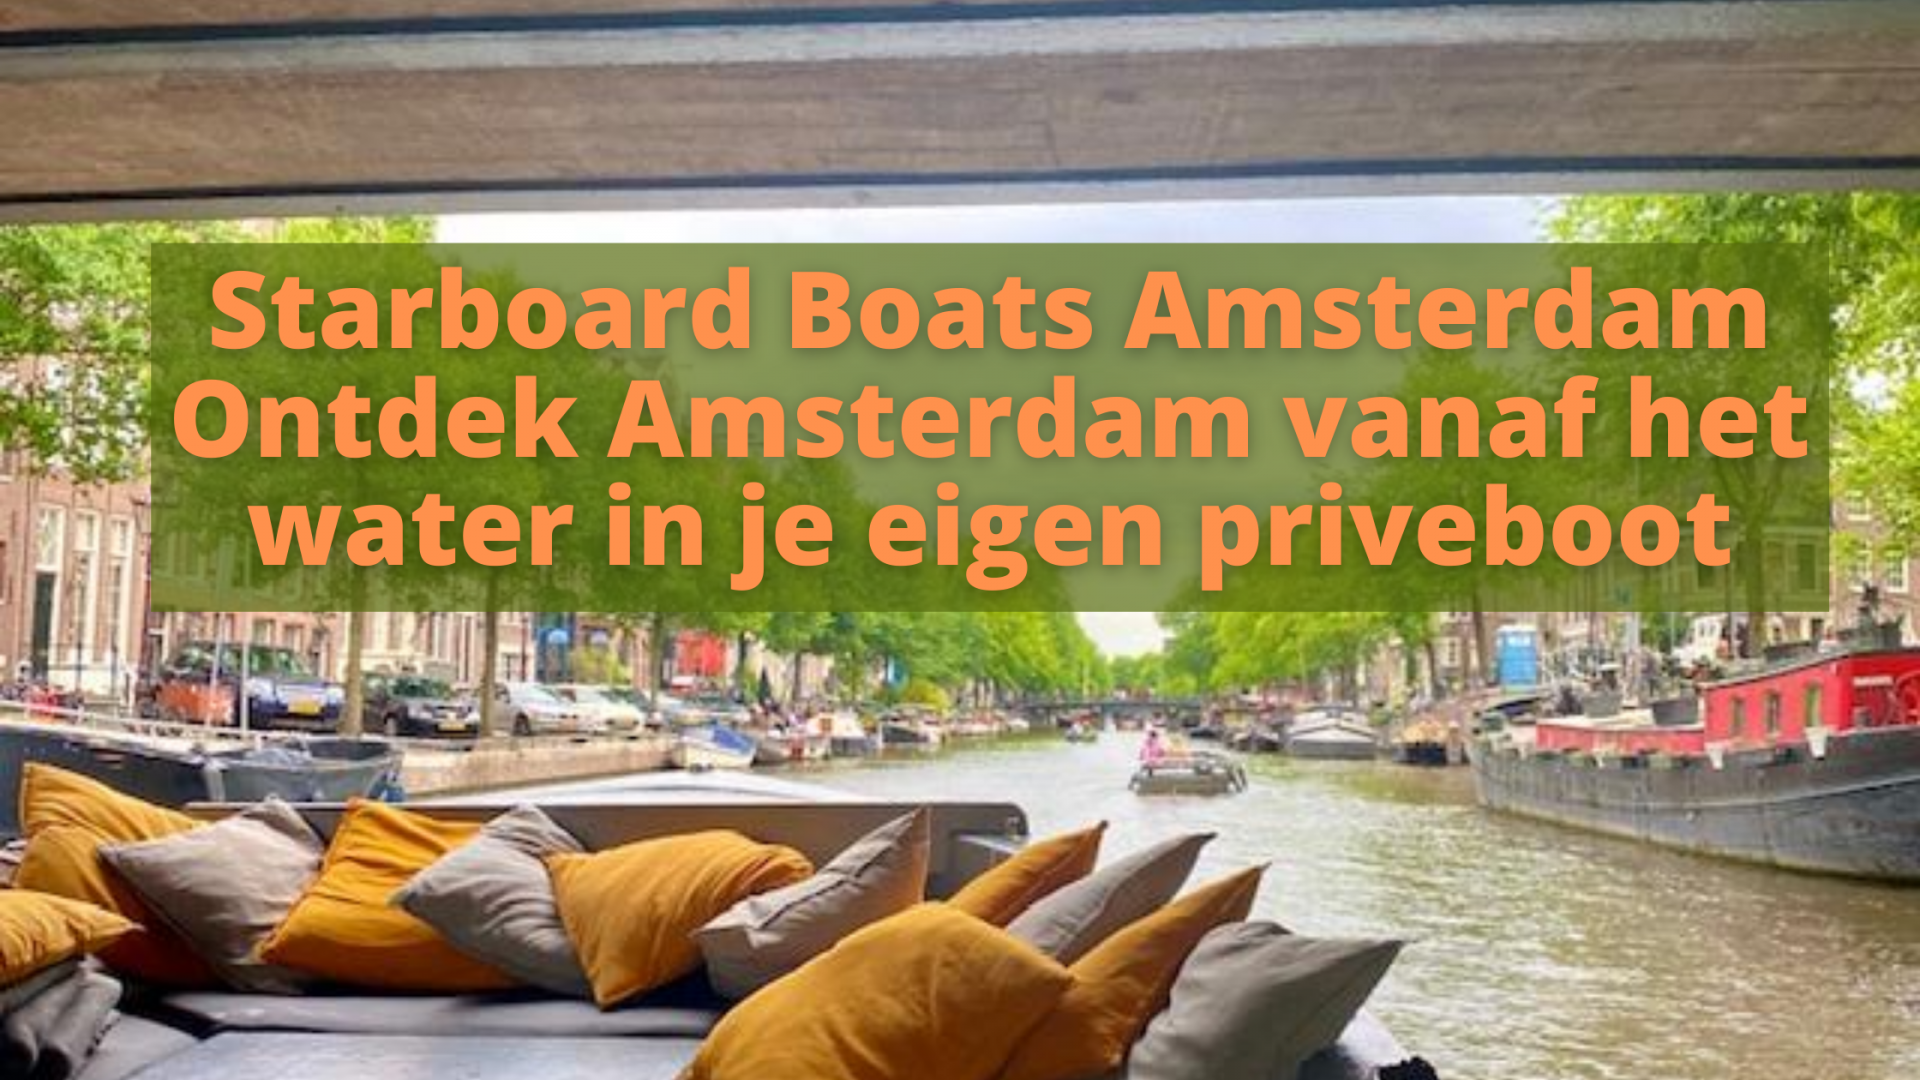 Starboard Boats Amsterdam